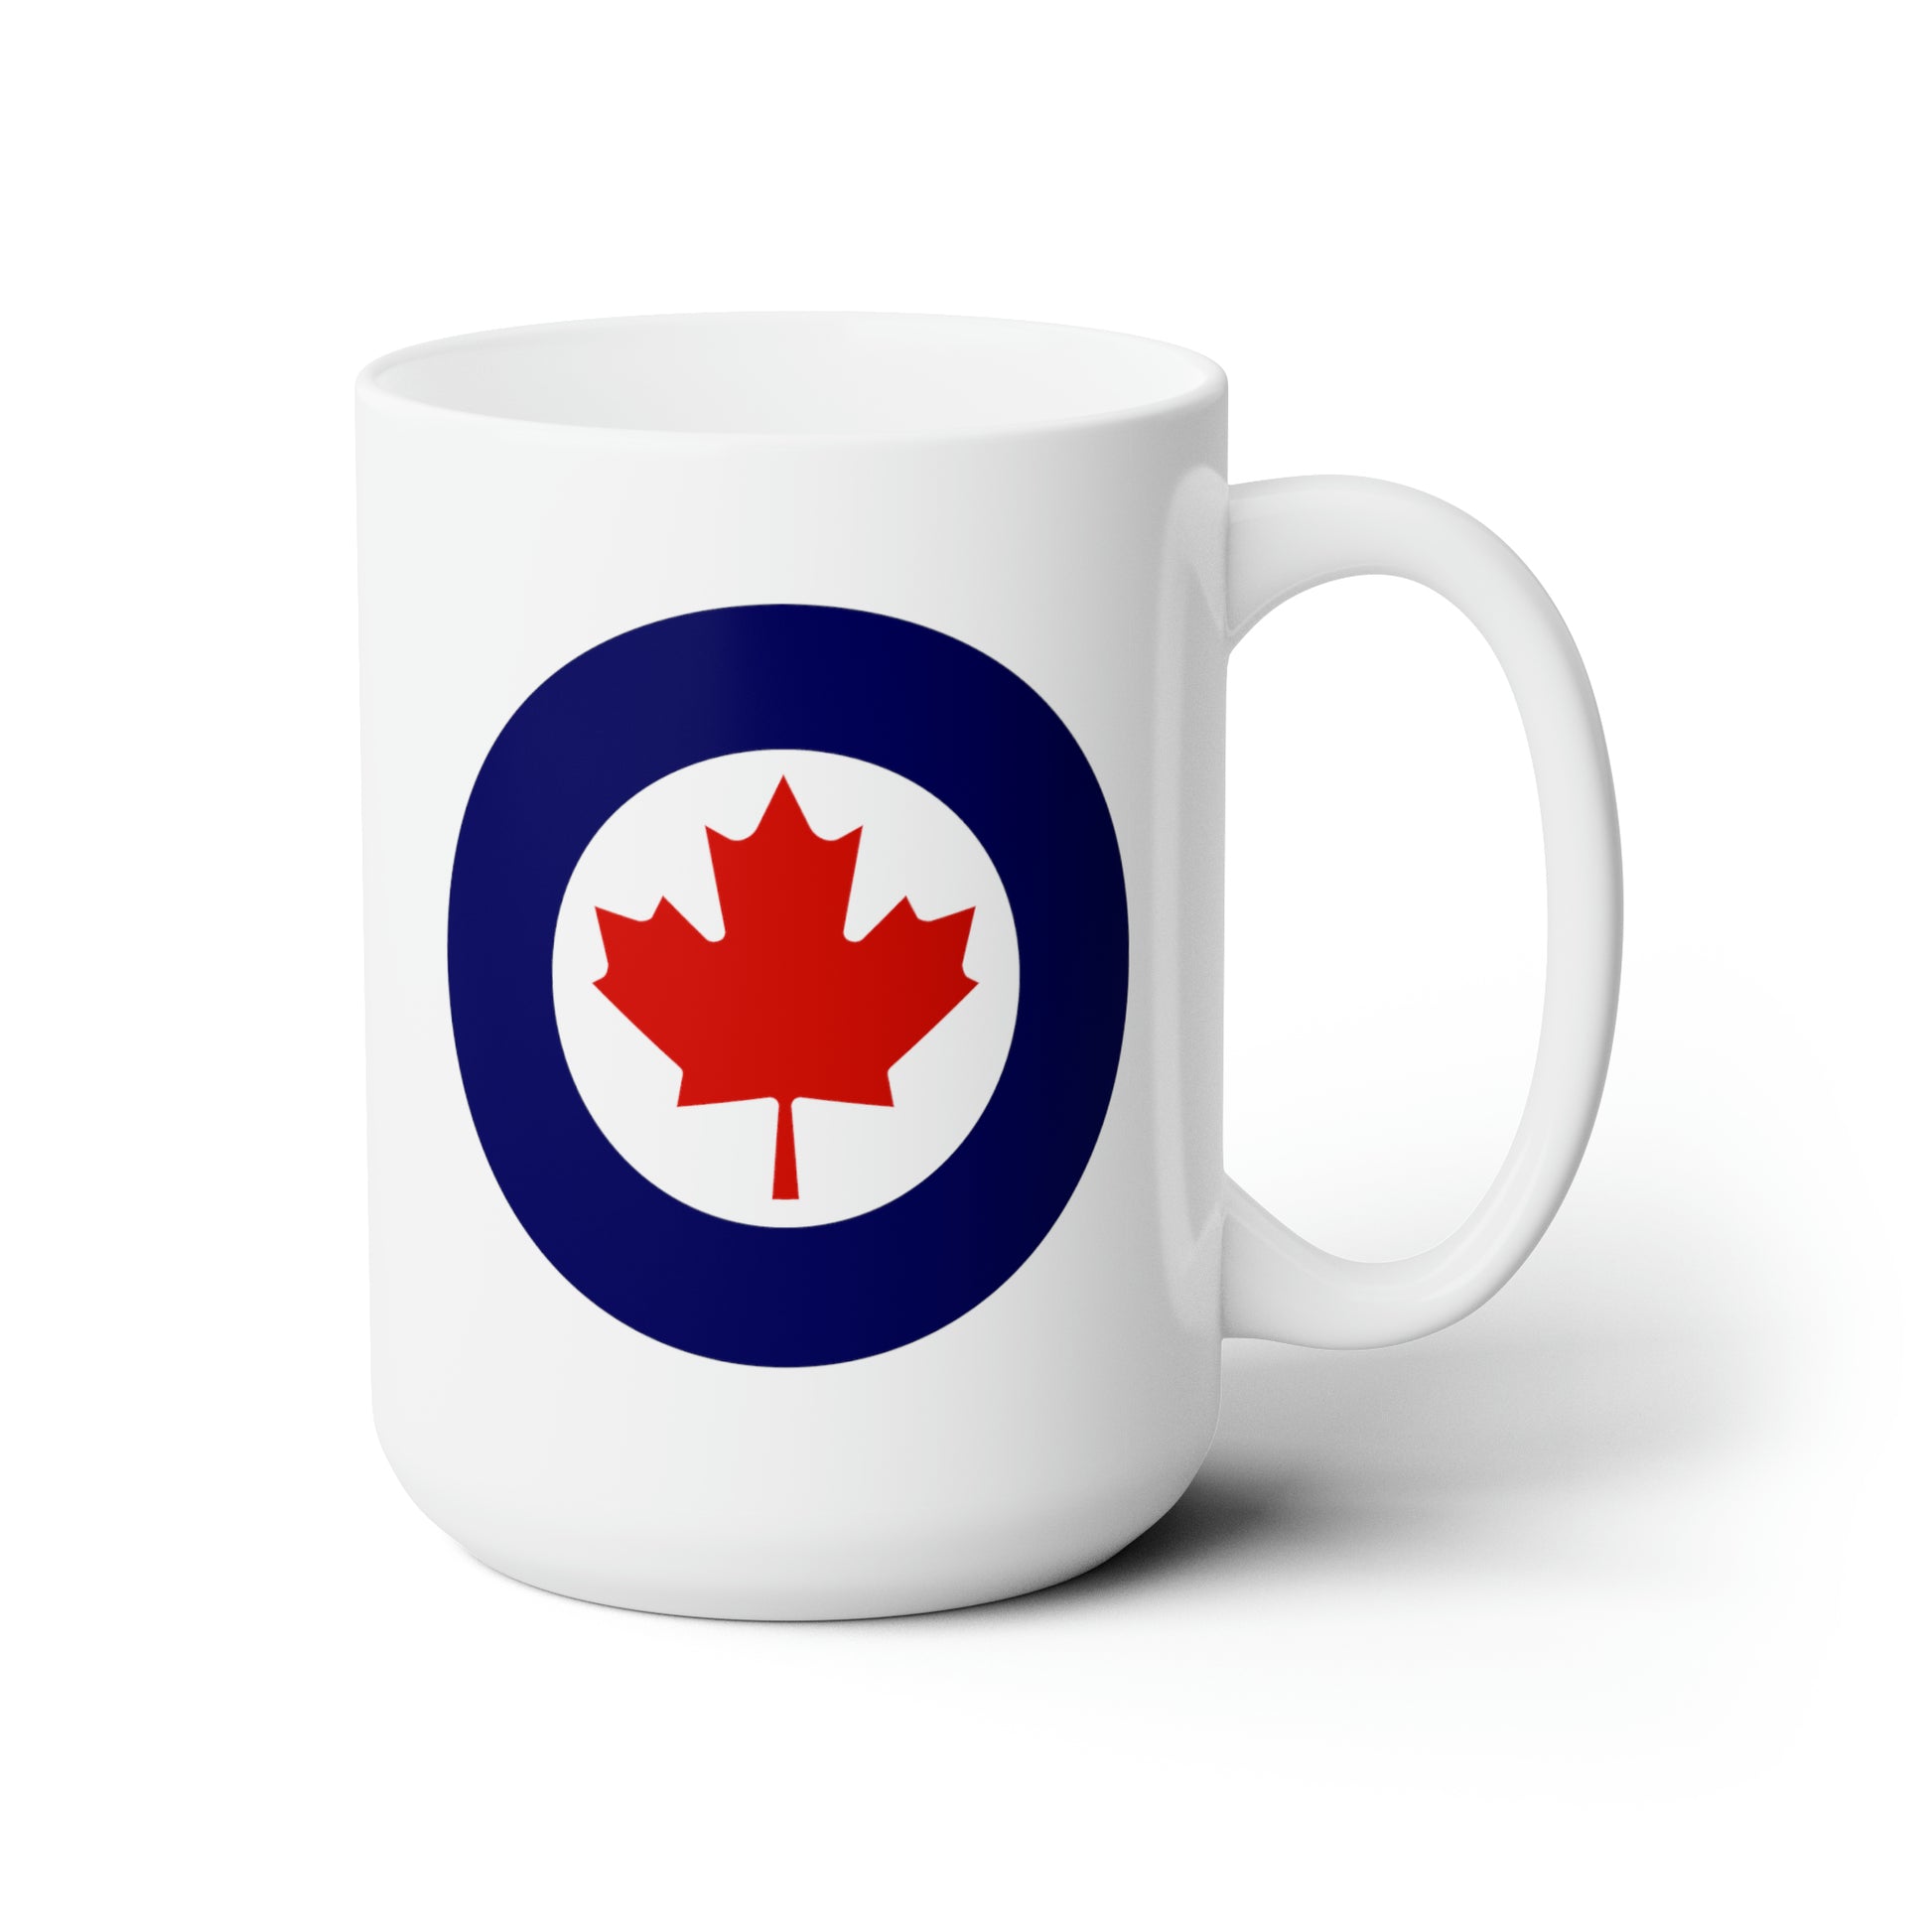 Canadian Air Force Roundel Coffee Mug - Double Sided White Ceramic 15oz - by TheGlassyLass.com